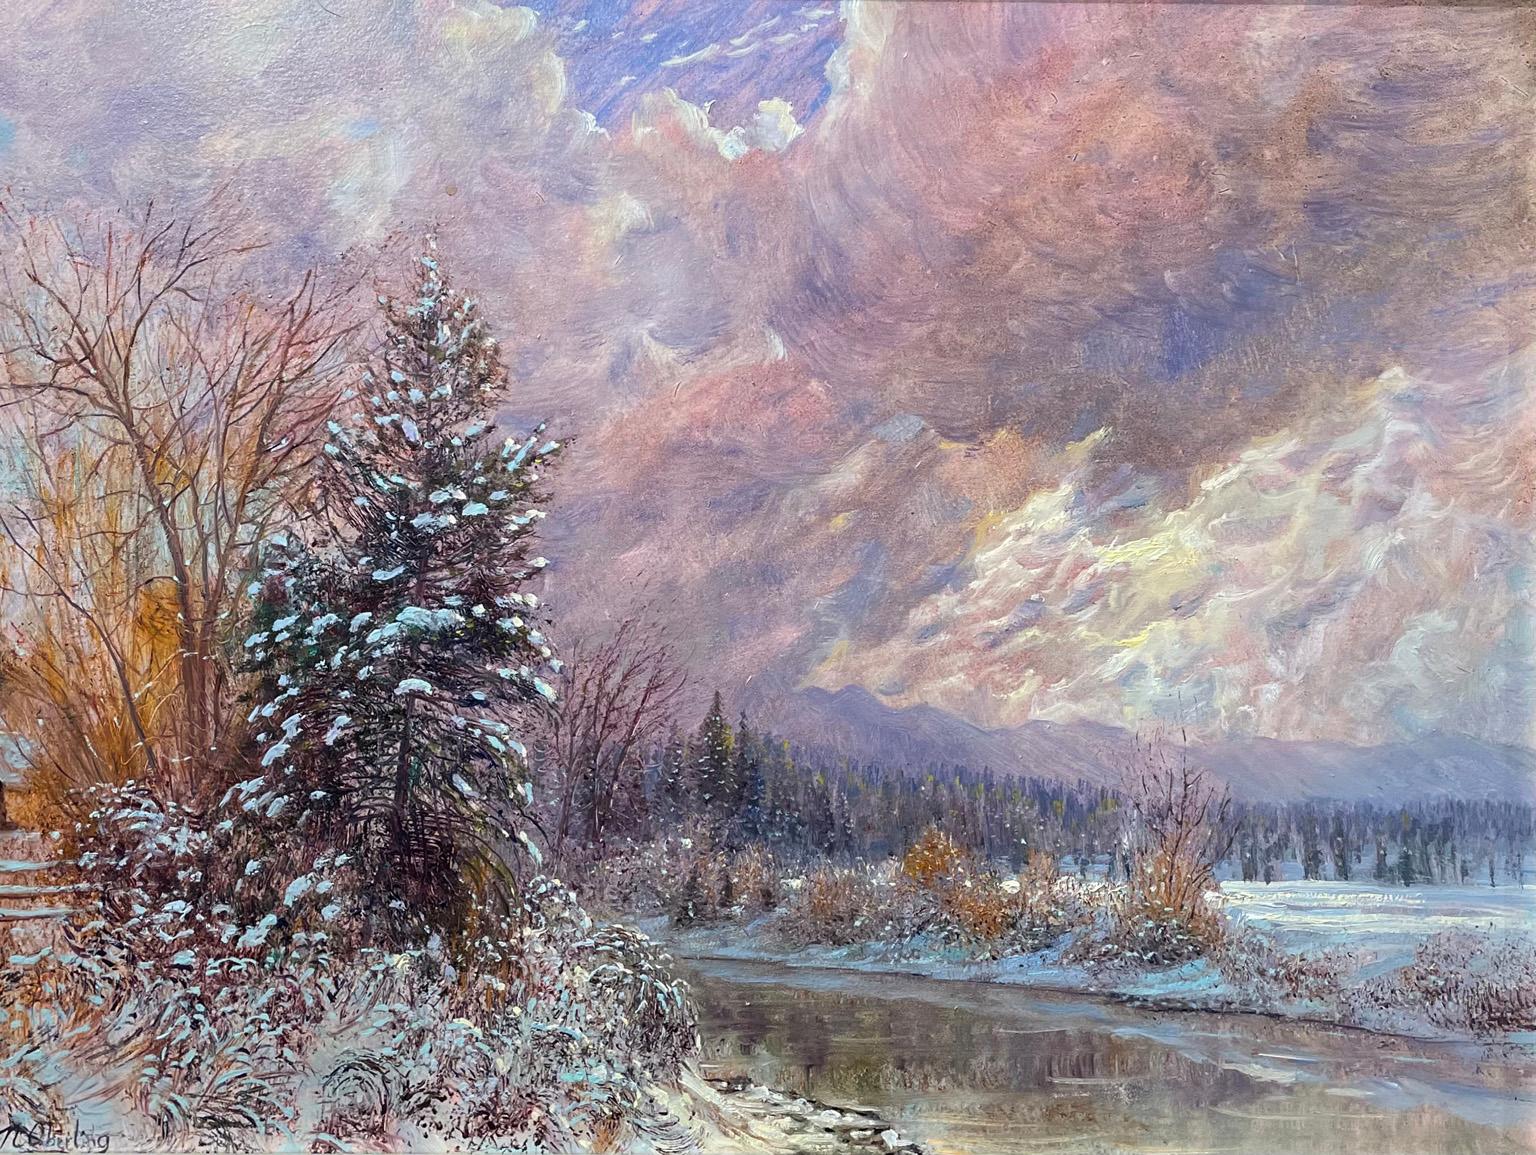 Nicholas Oberling Landscape Painting - Winter Solitude in Montana